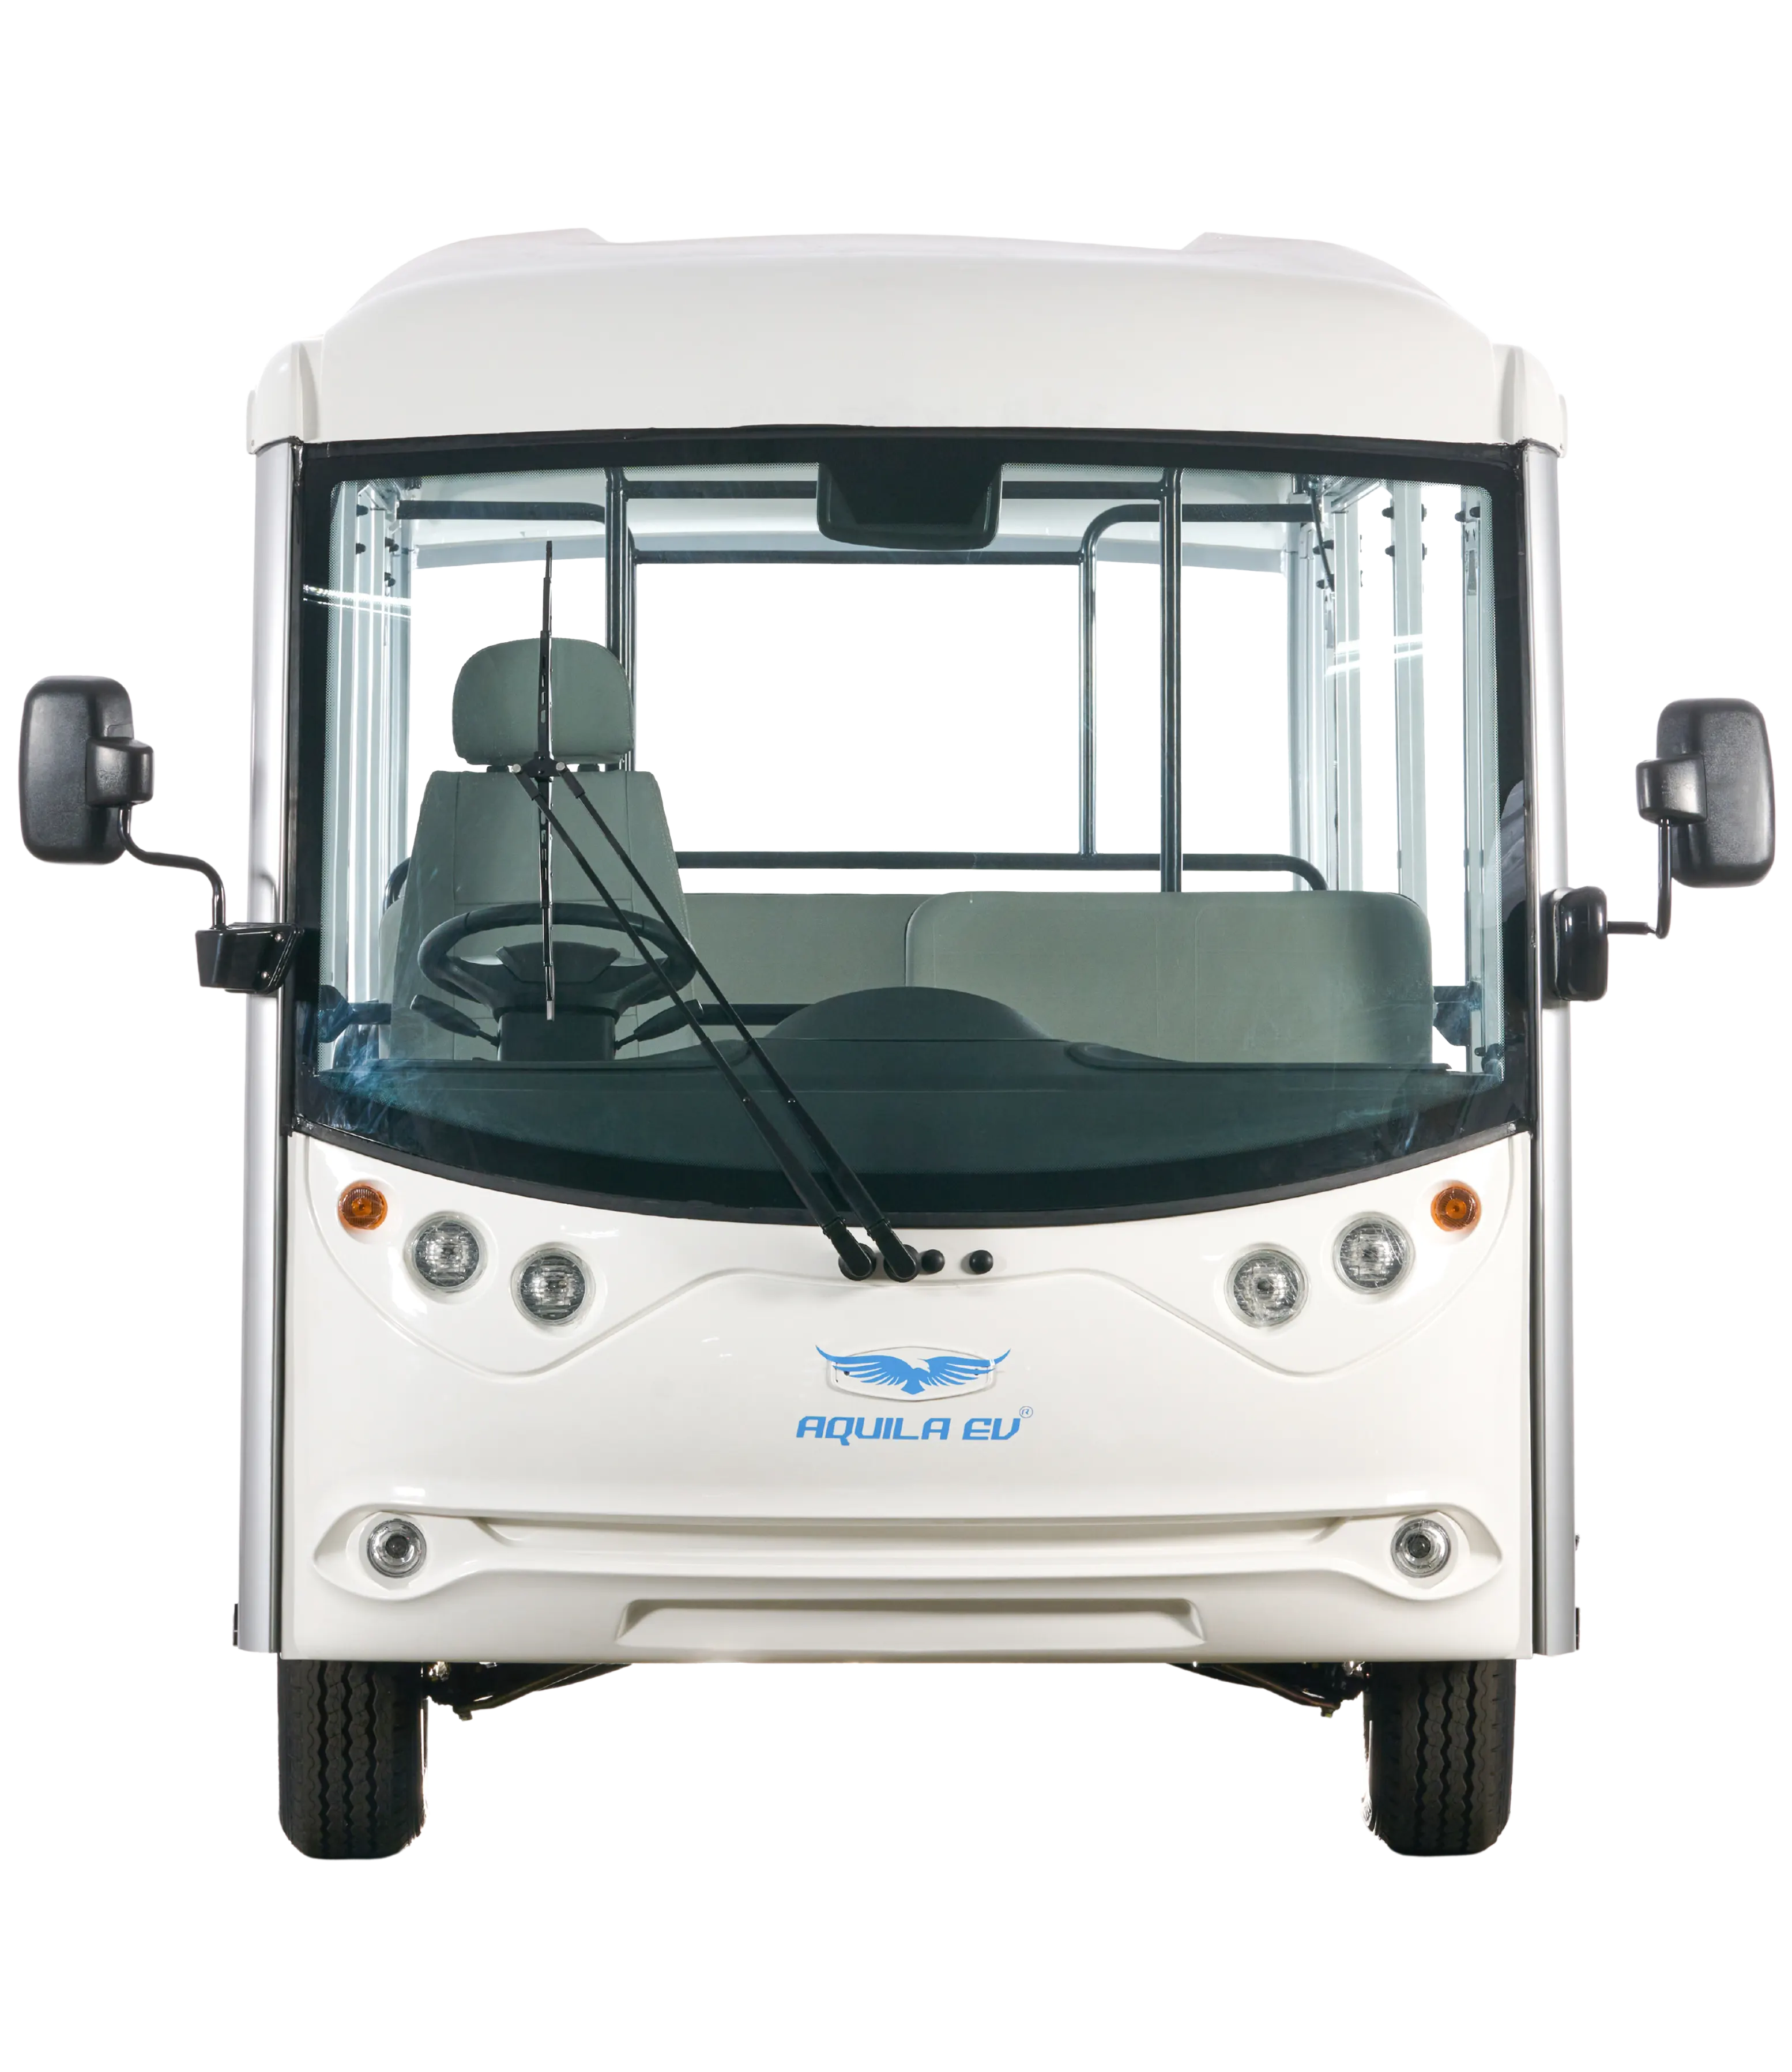  23 Seater Battery Power Mini Bus - Tri Electric
                                        